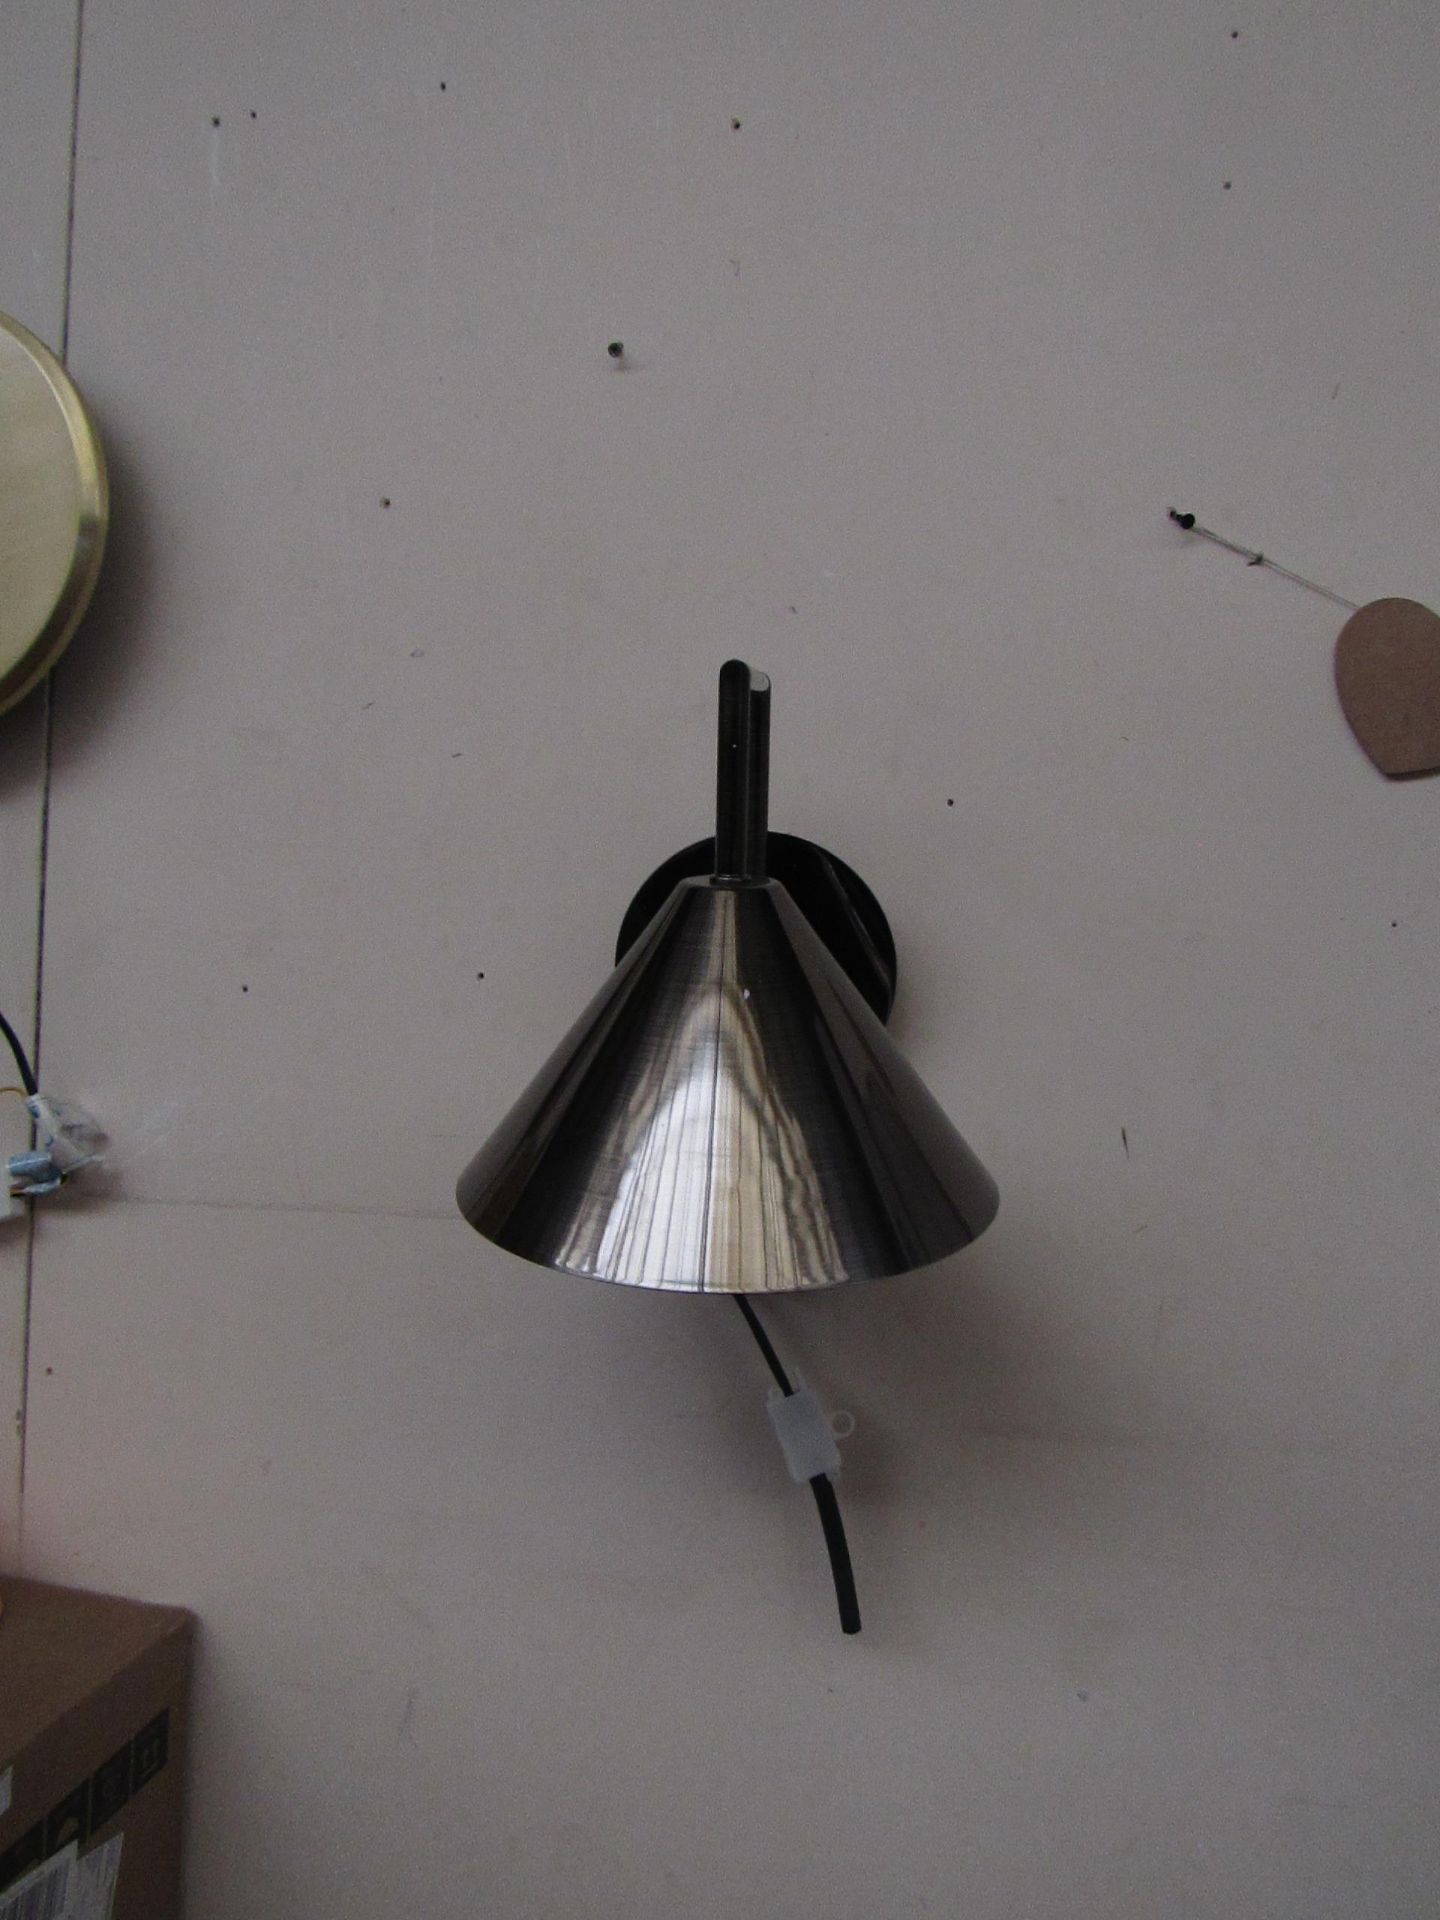 | 1X | SWOON JOEY WALL LIGHT | UNCHECKED AND IN ORIGINAL BOX | RRP £69 |